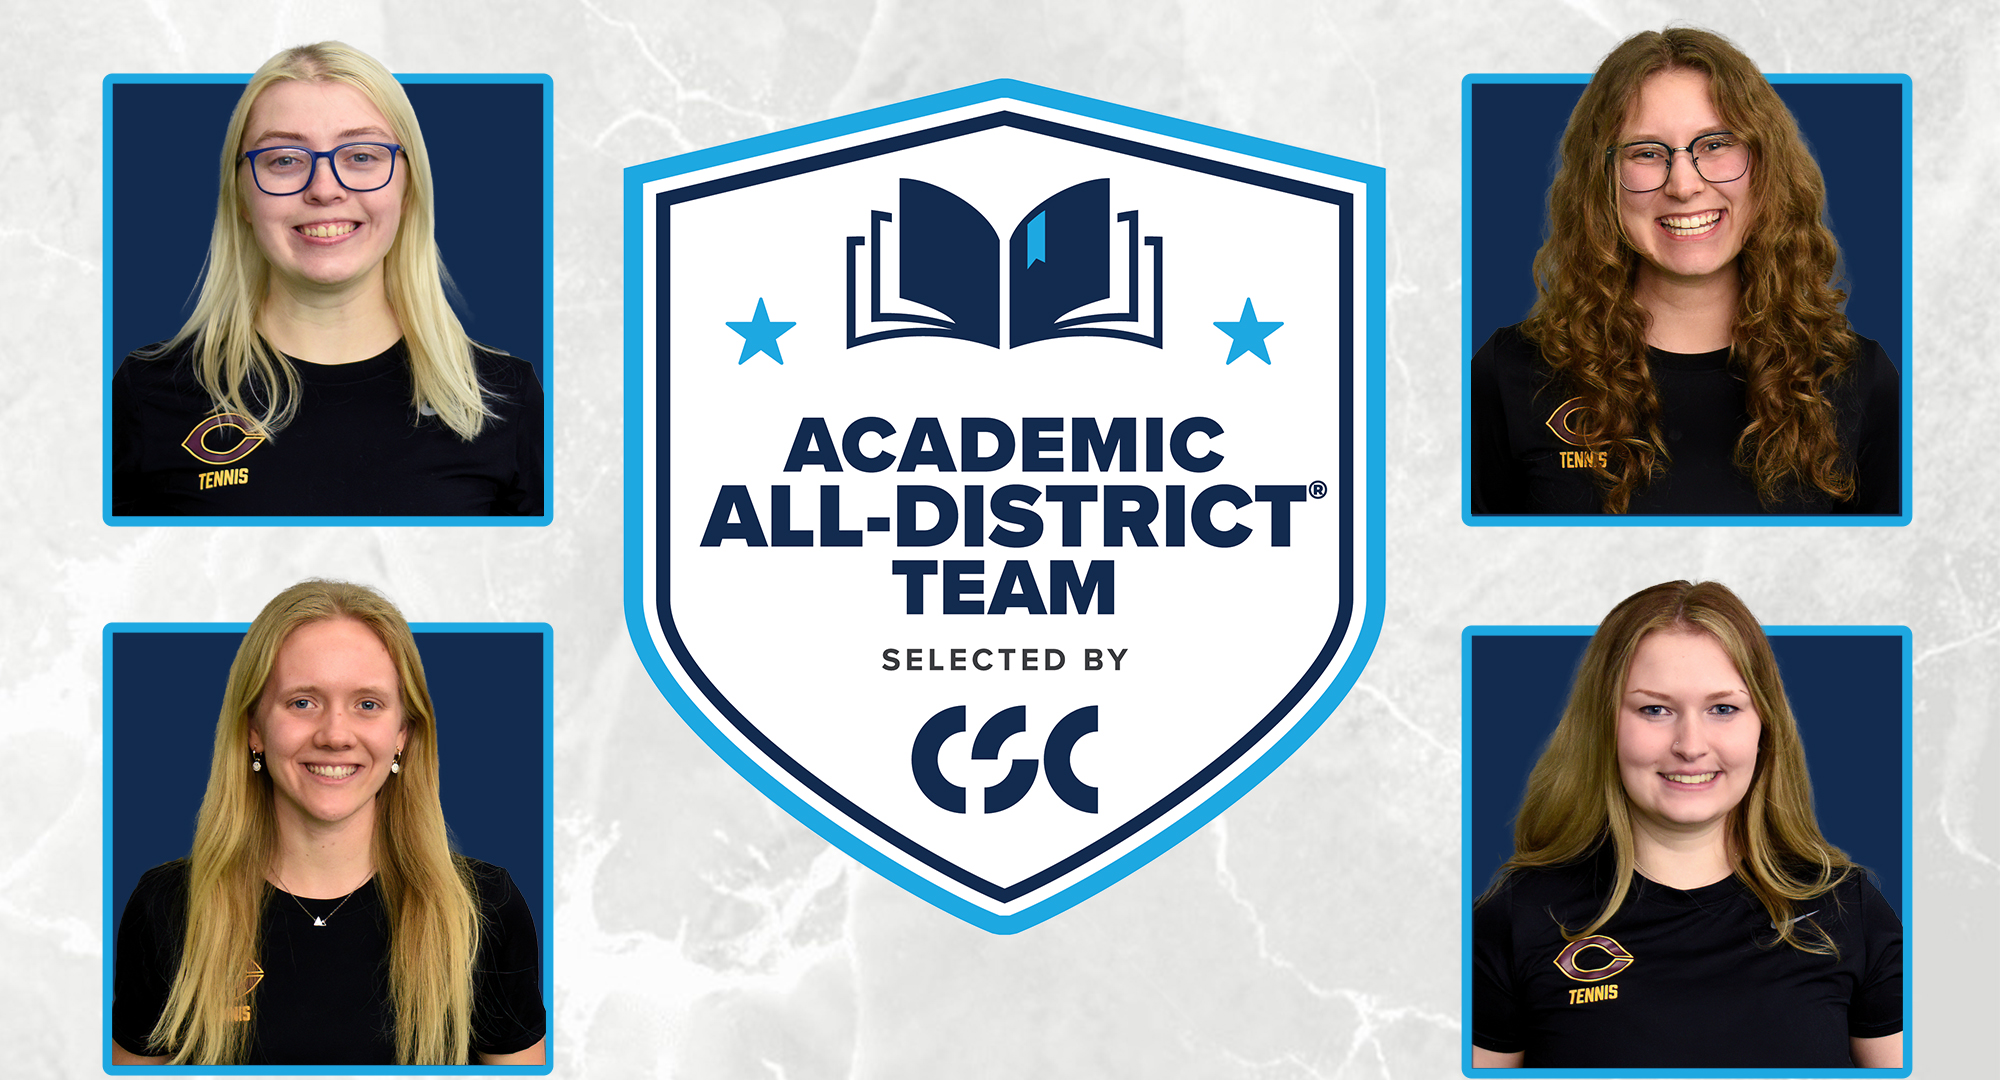 Juniors Lizzie Allan and Erin Borchard and seniors Anna Hacker and Mary Skorich were all named to the CSC Academic All-District Team.